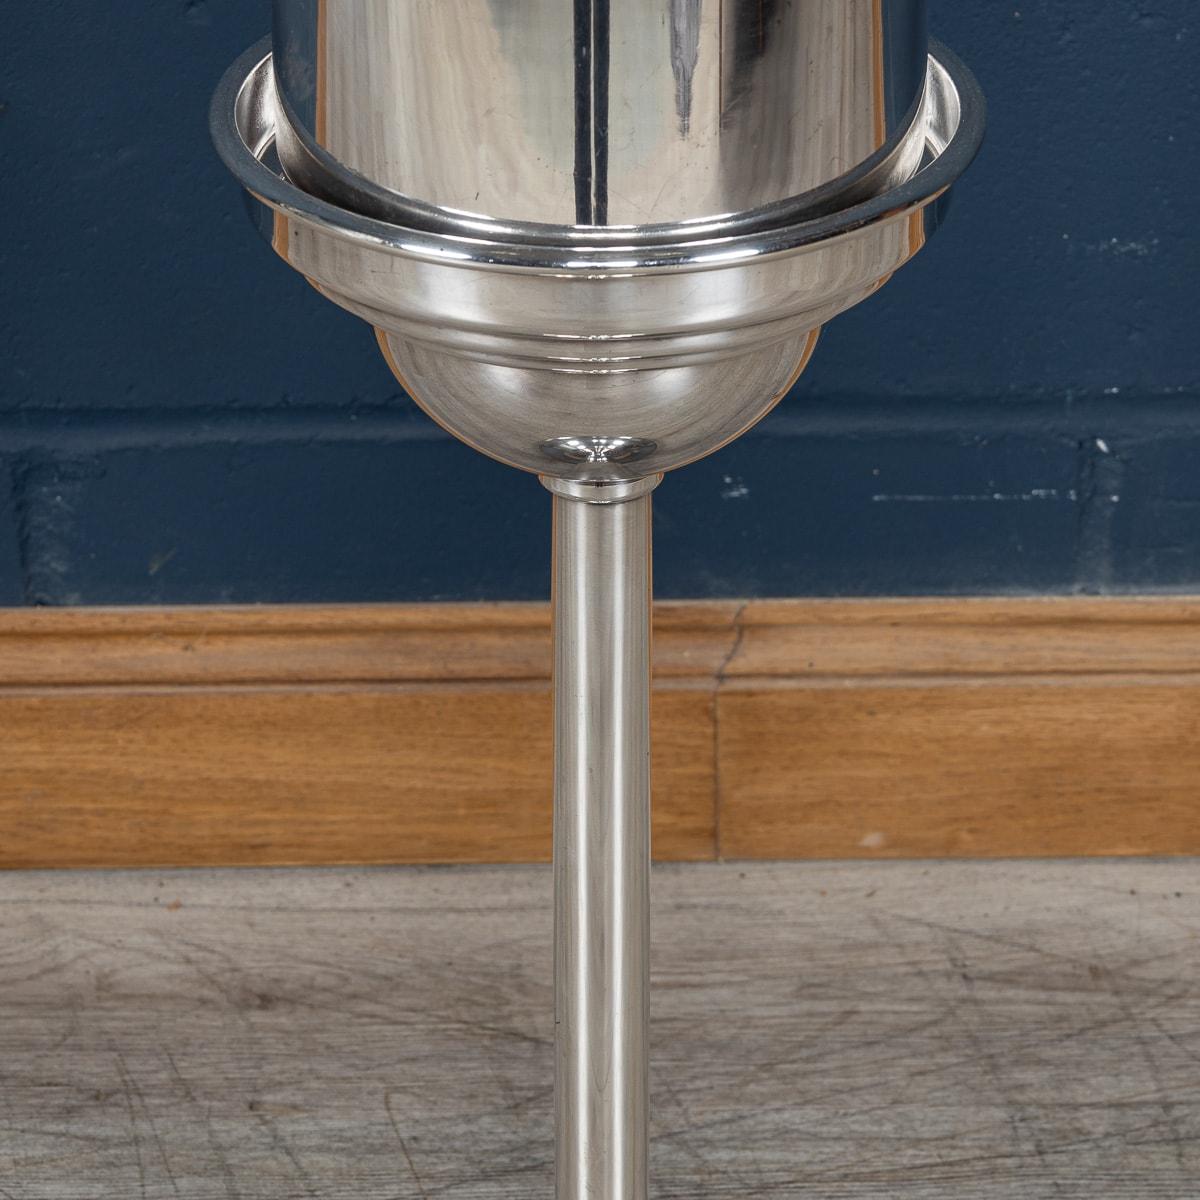 Mid 20th Century Art Deco Champagne Bucket On Stand, Made In USA c.1960 For Sale 6